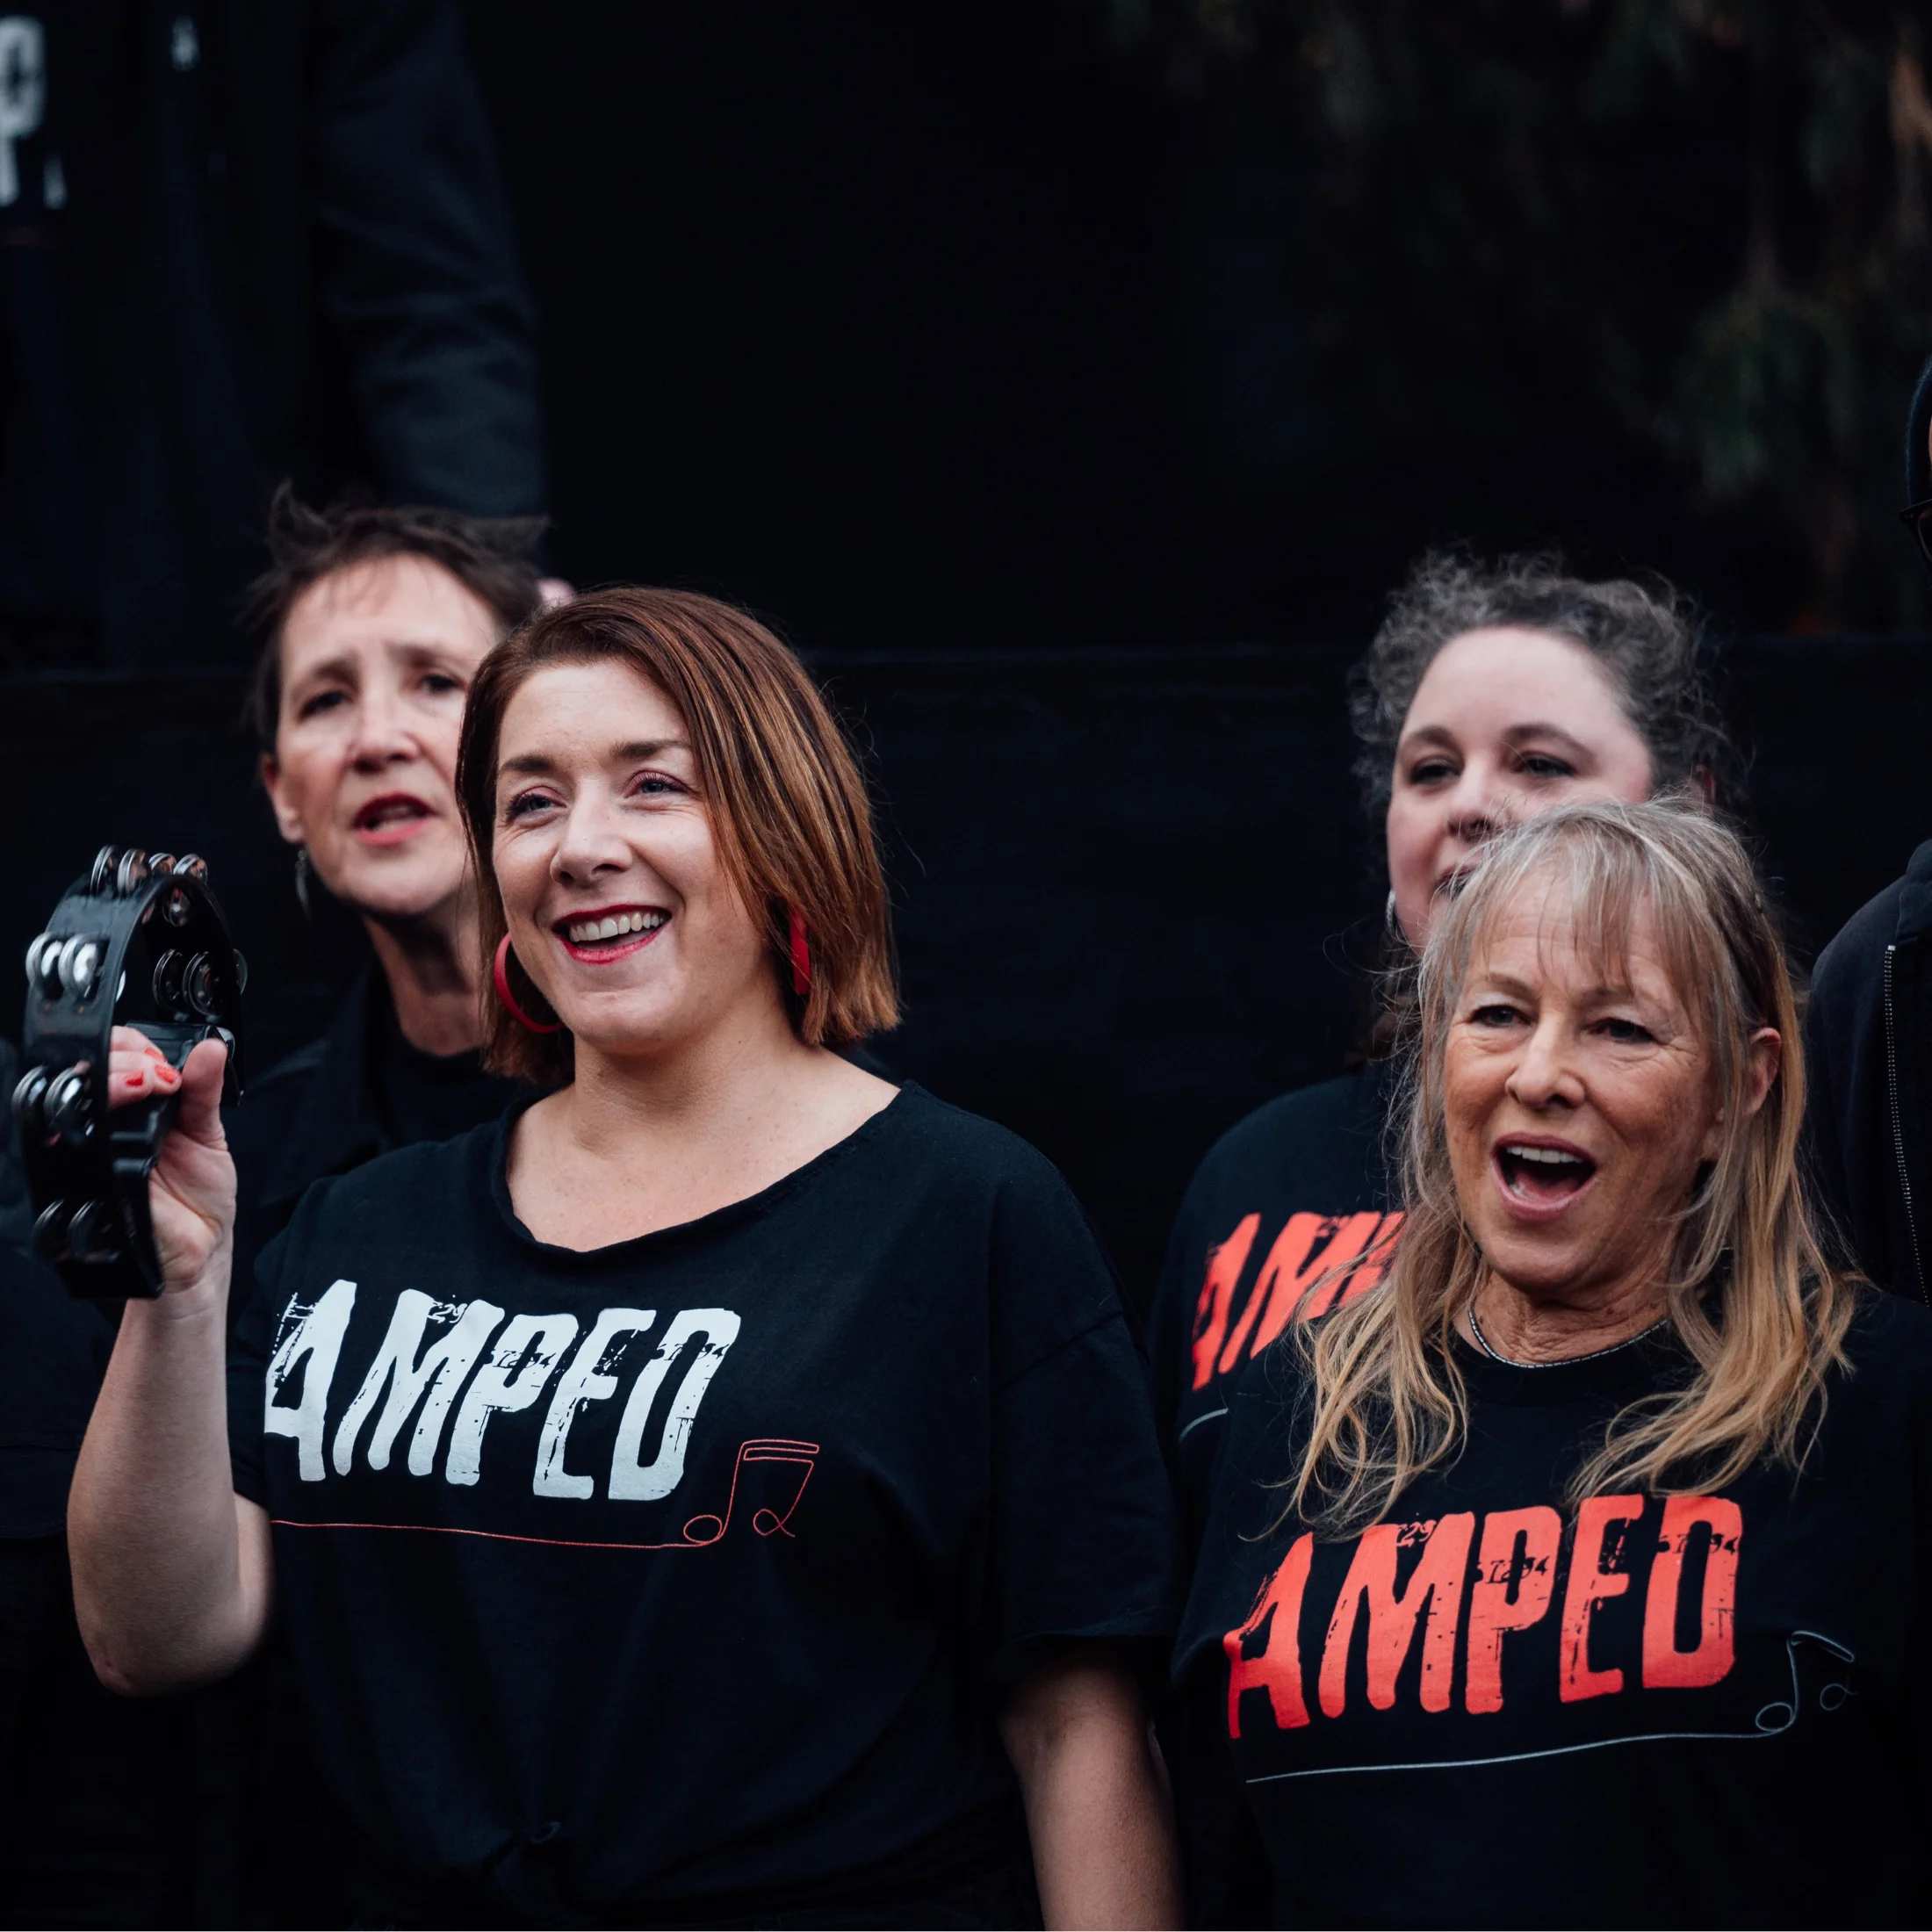 A colour photograph of people singing in an outdoor setting. They're wearing black t-shirts with the text 'amped' written across the front. The event is a part of the Festival of Voices program